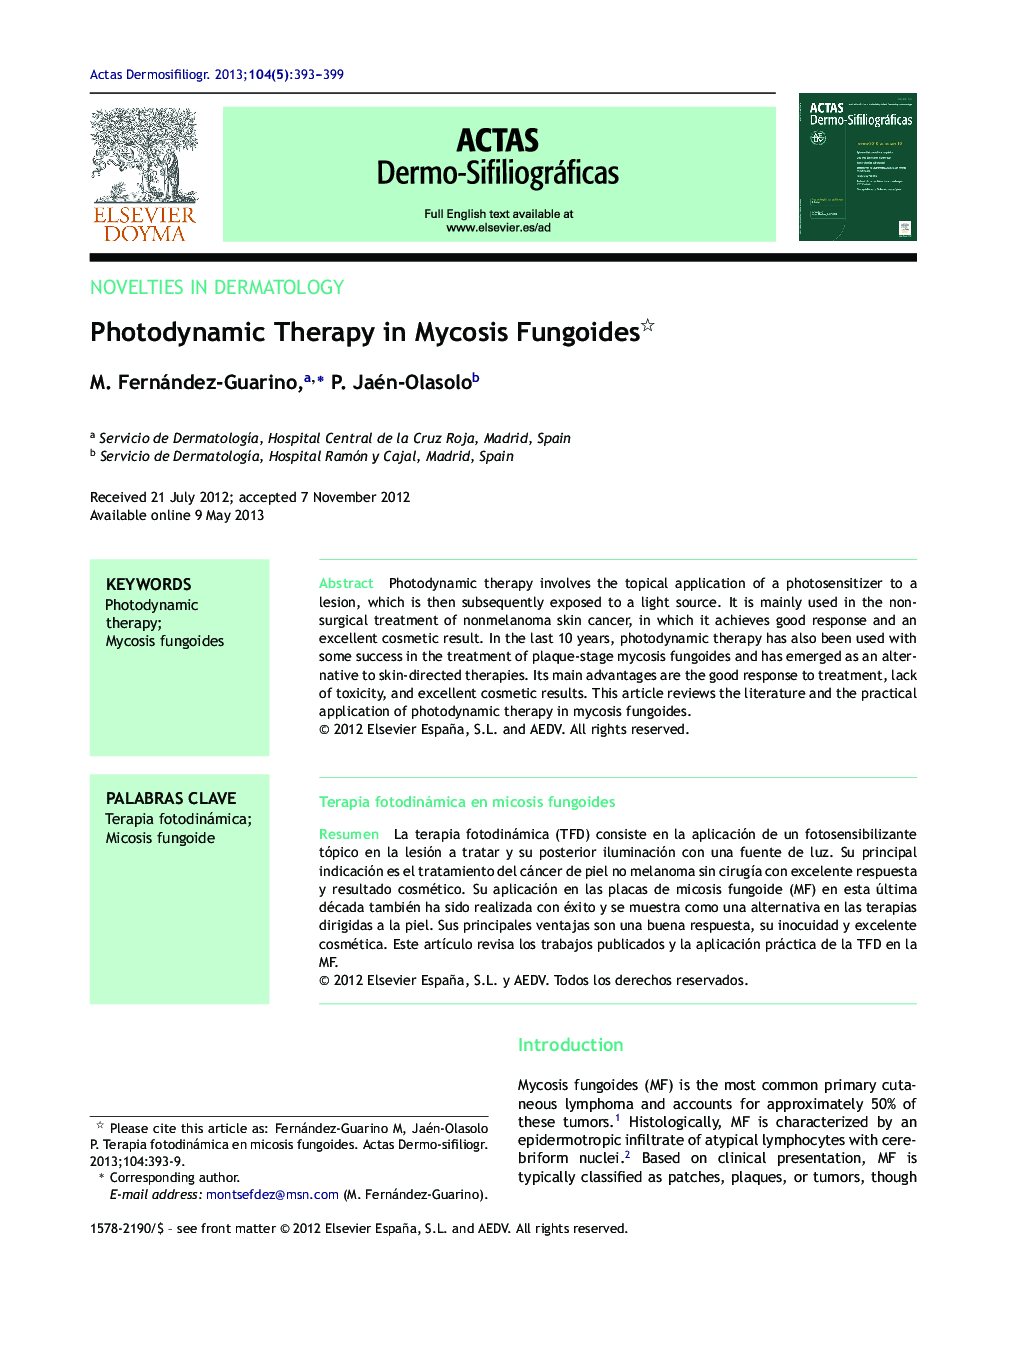 Photodynamic Therapy in Mycosis Fungoides 